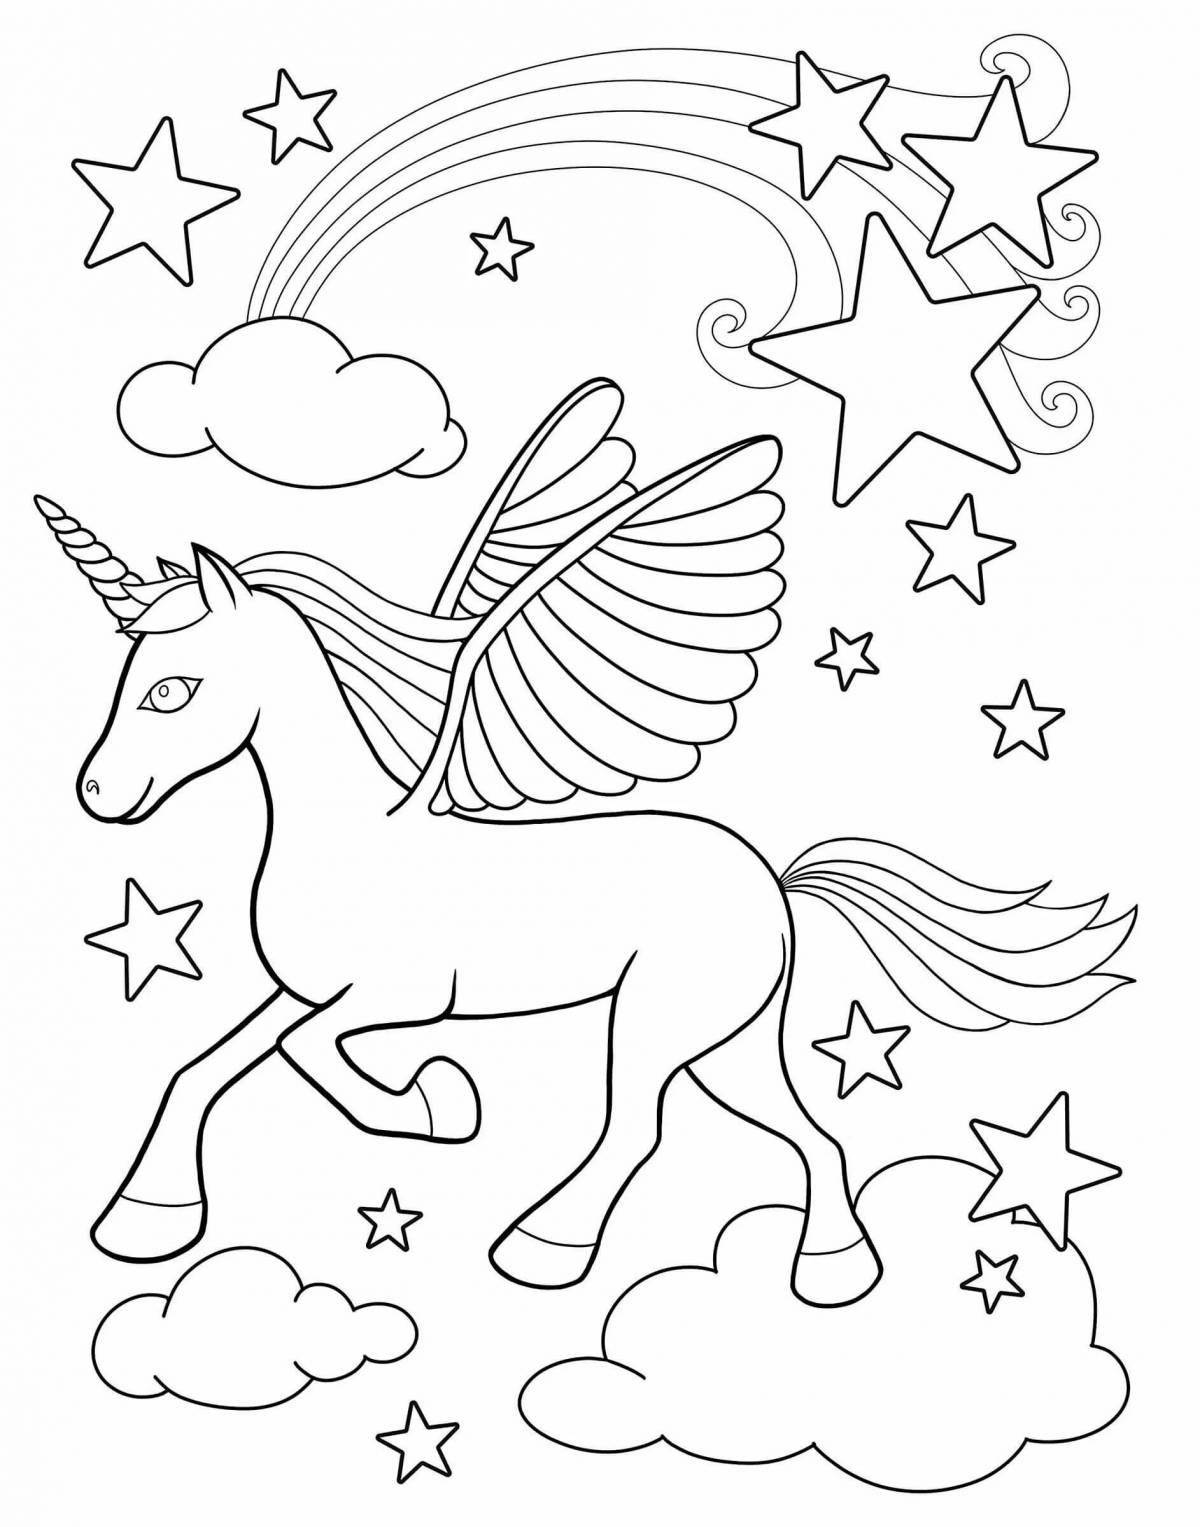 Radiantly coloring page include unicorns